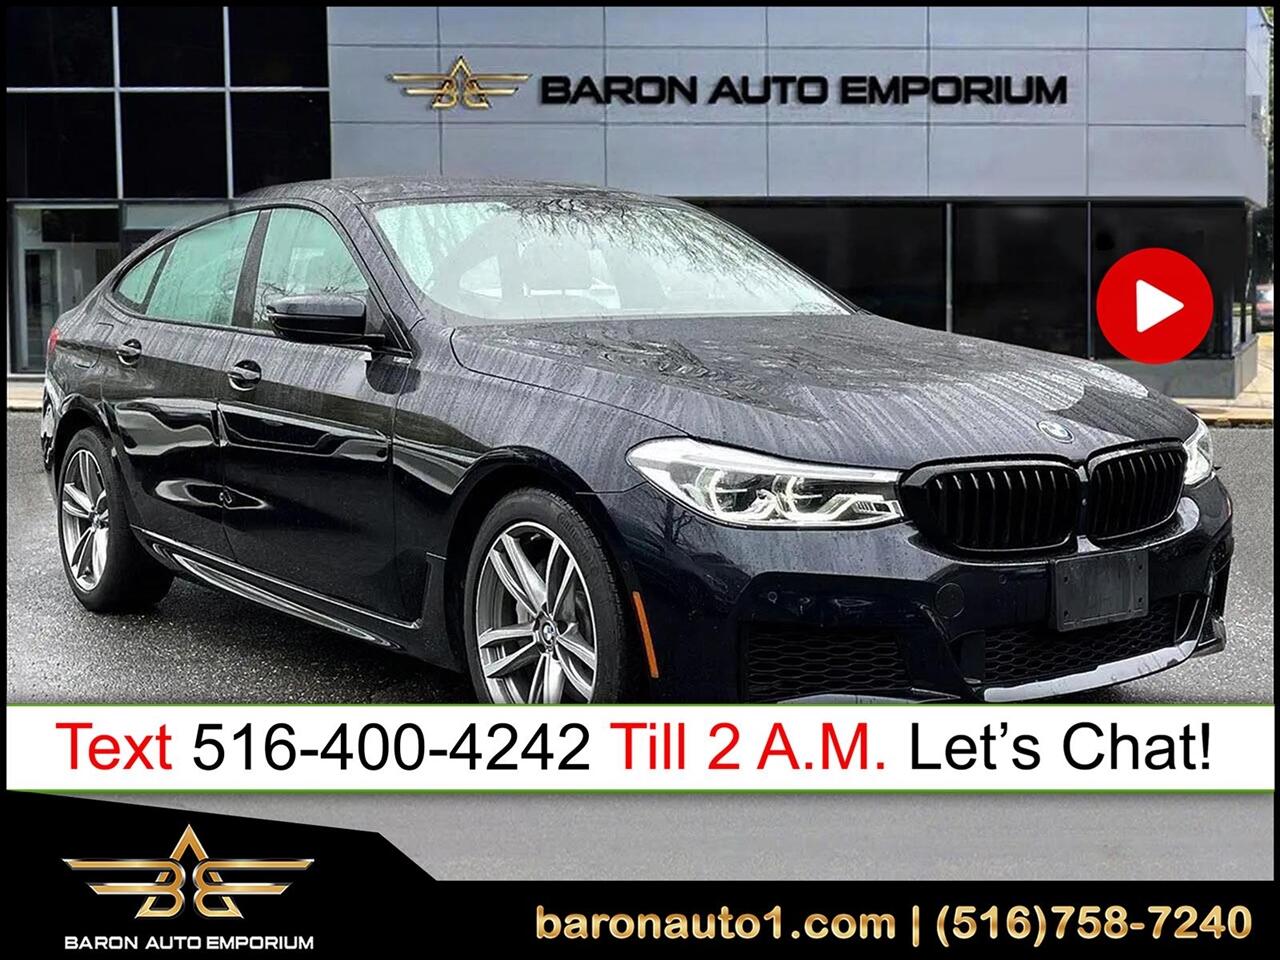 Used 2019 BMW 6 Series 640i xDrive Gran Turismo for Sale in Roslyn Heights  NY 11577 Baron Auto Emporium